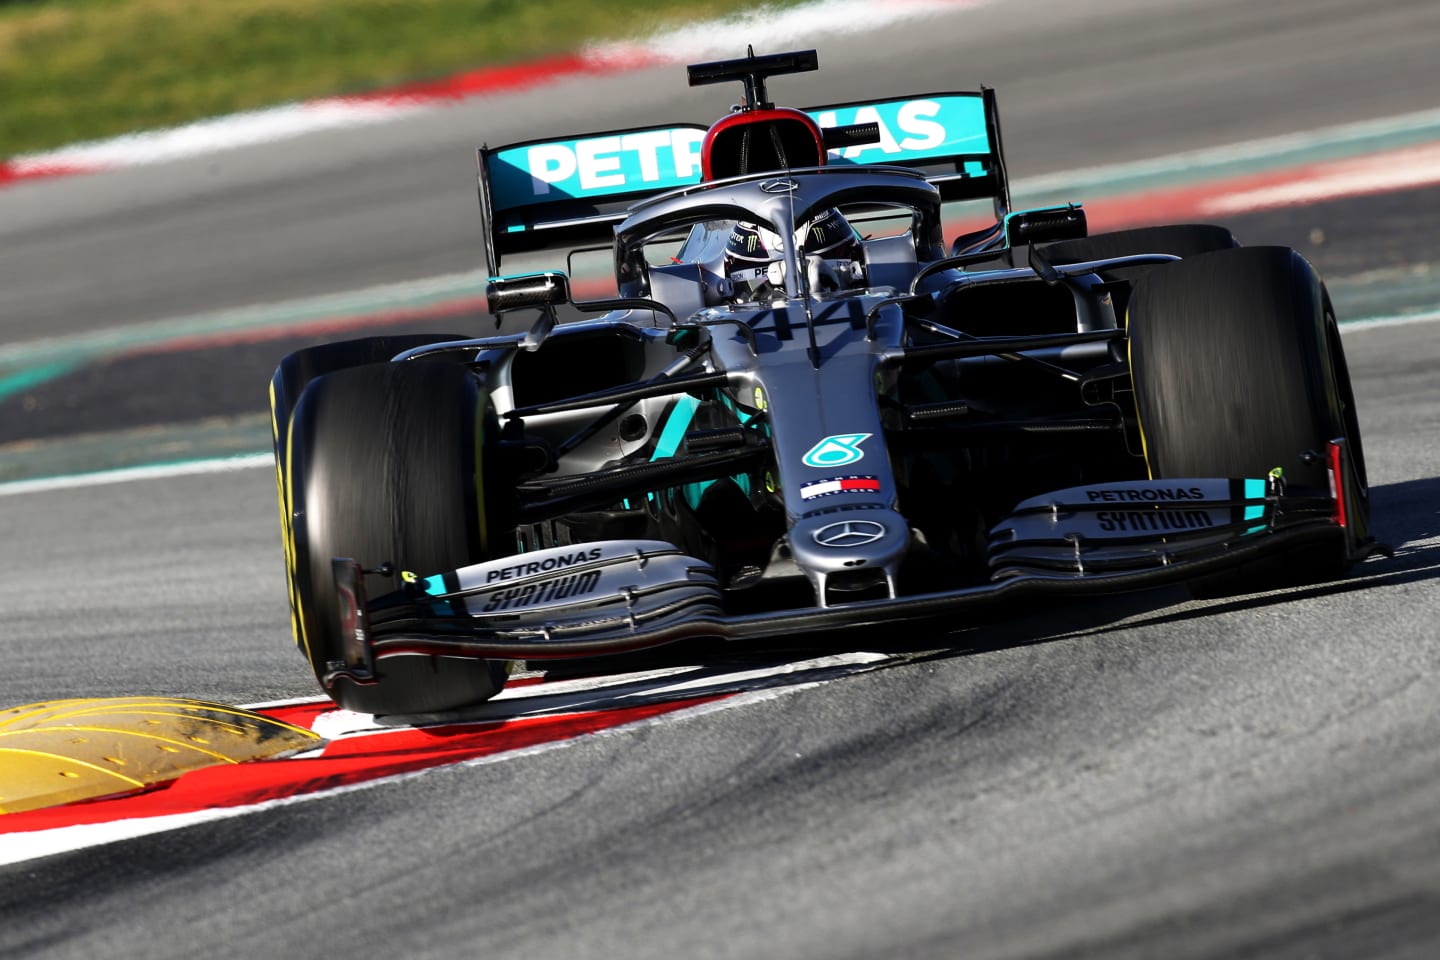 BARCELONA, SPAIN - FEBRUARY 28: Lewis Hamilton of Great Britain driving the (44) Mercedes AMG